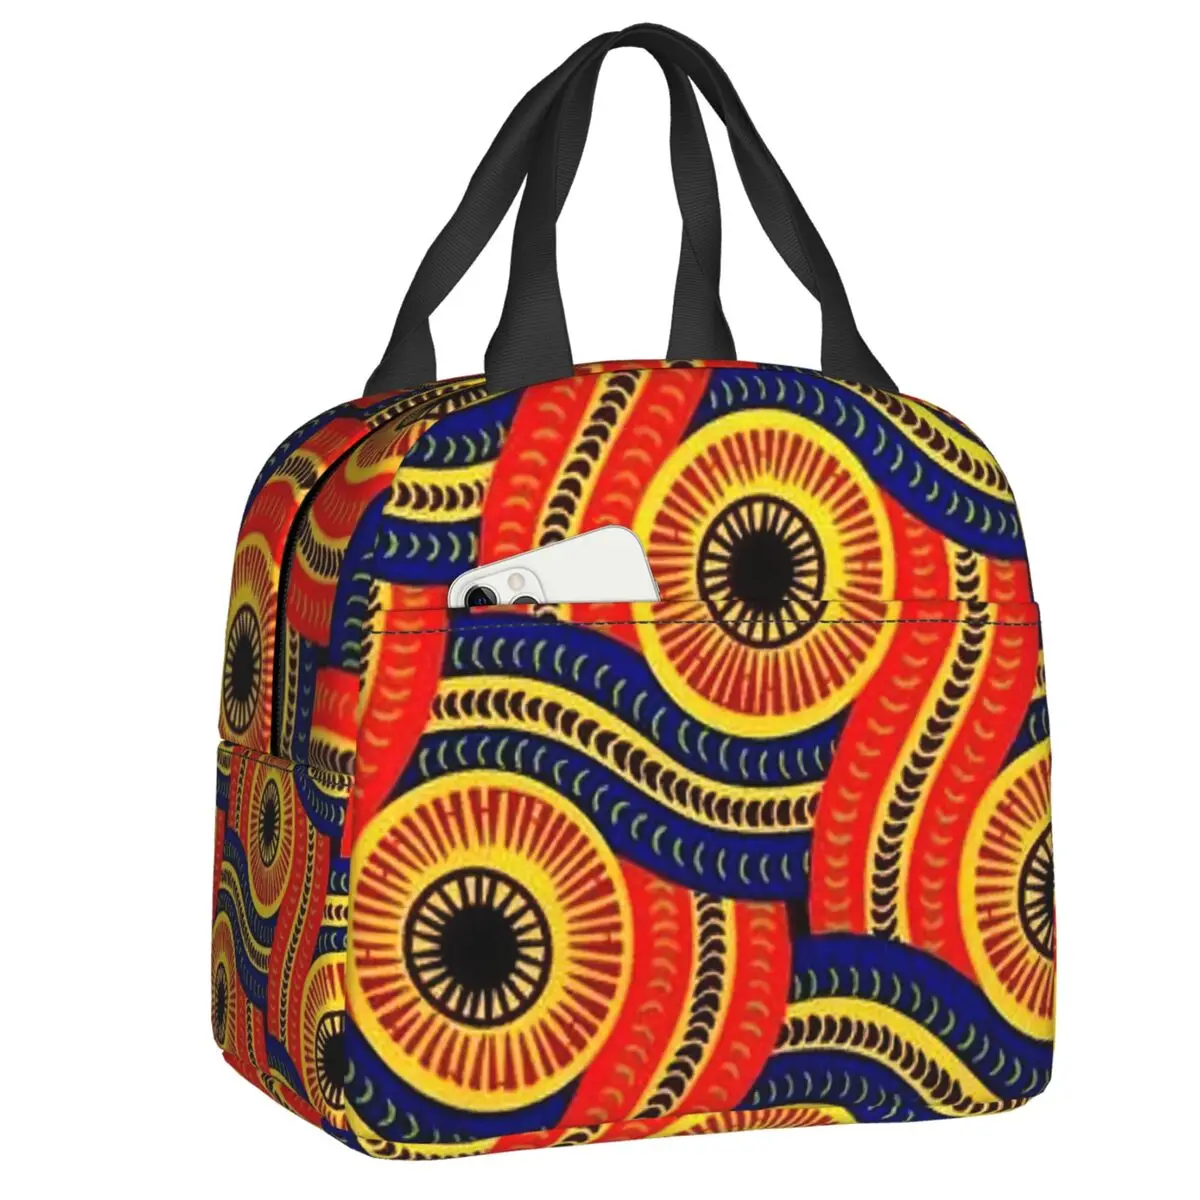 

Serpent African Ankara Insulated Lunch Bags for Women Tribal Ethnic Art Portable Thermal Cooler Bento Box Work School Travel